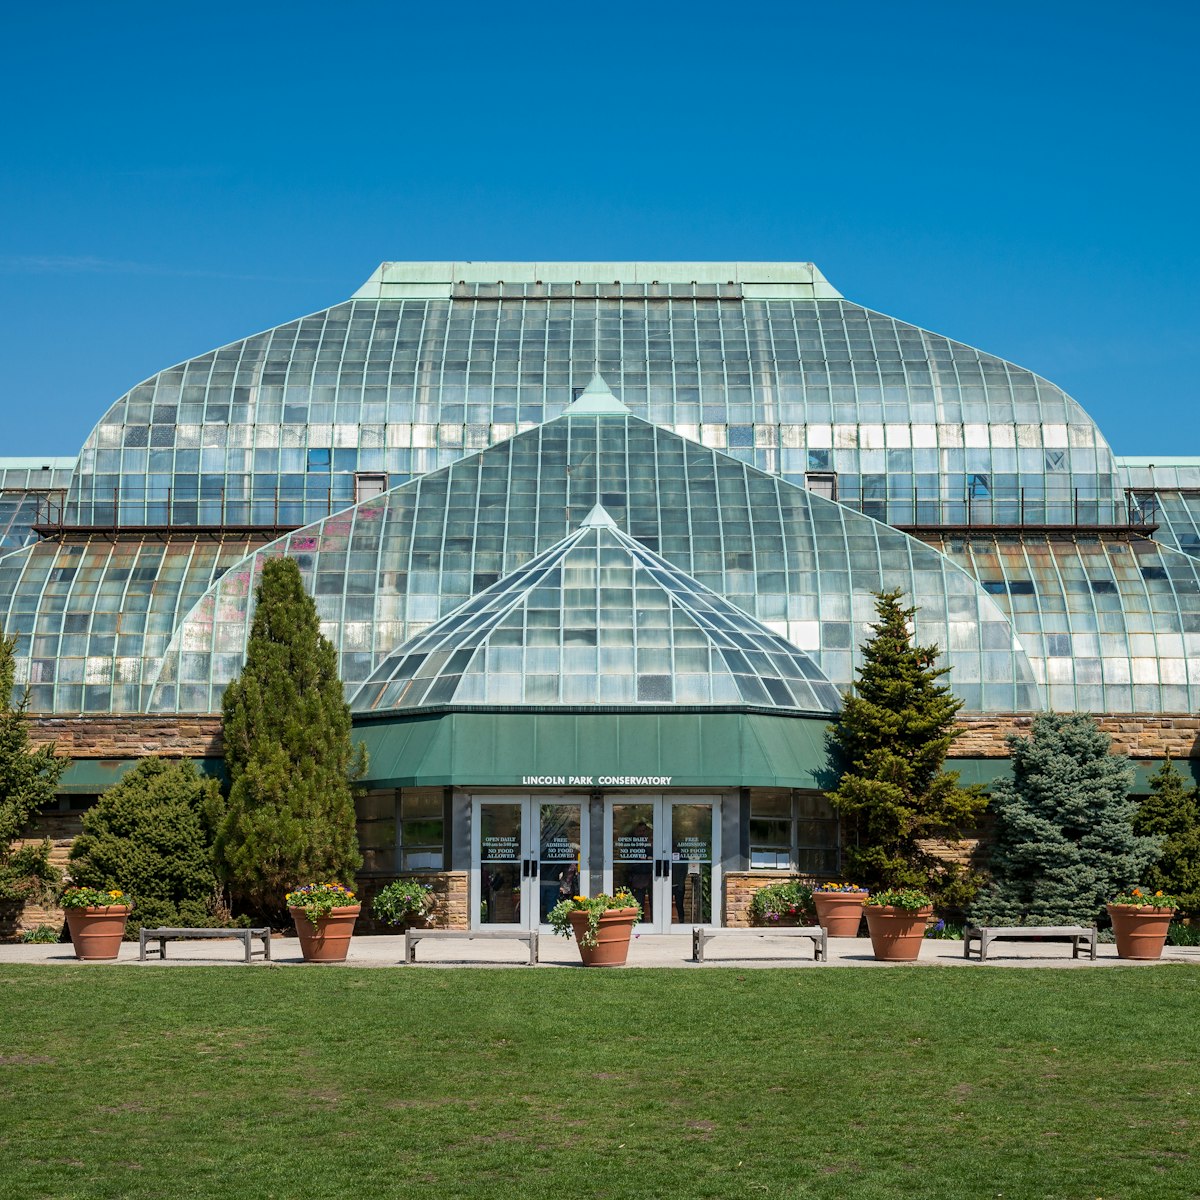 Lincoln Park Conservatory in Chicago, Illinois